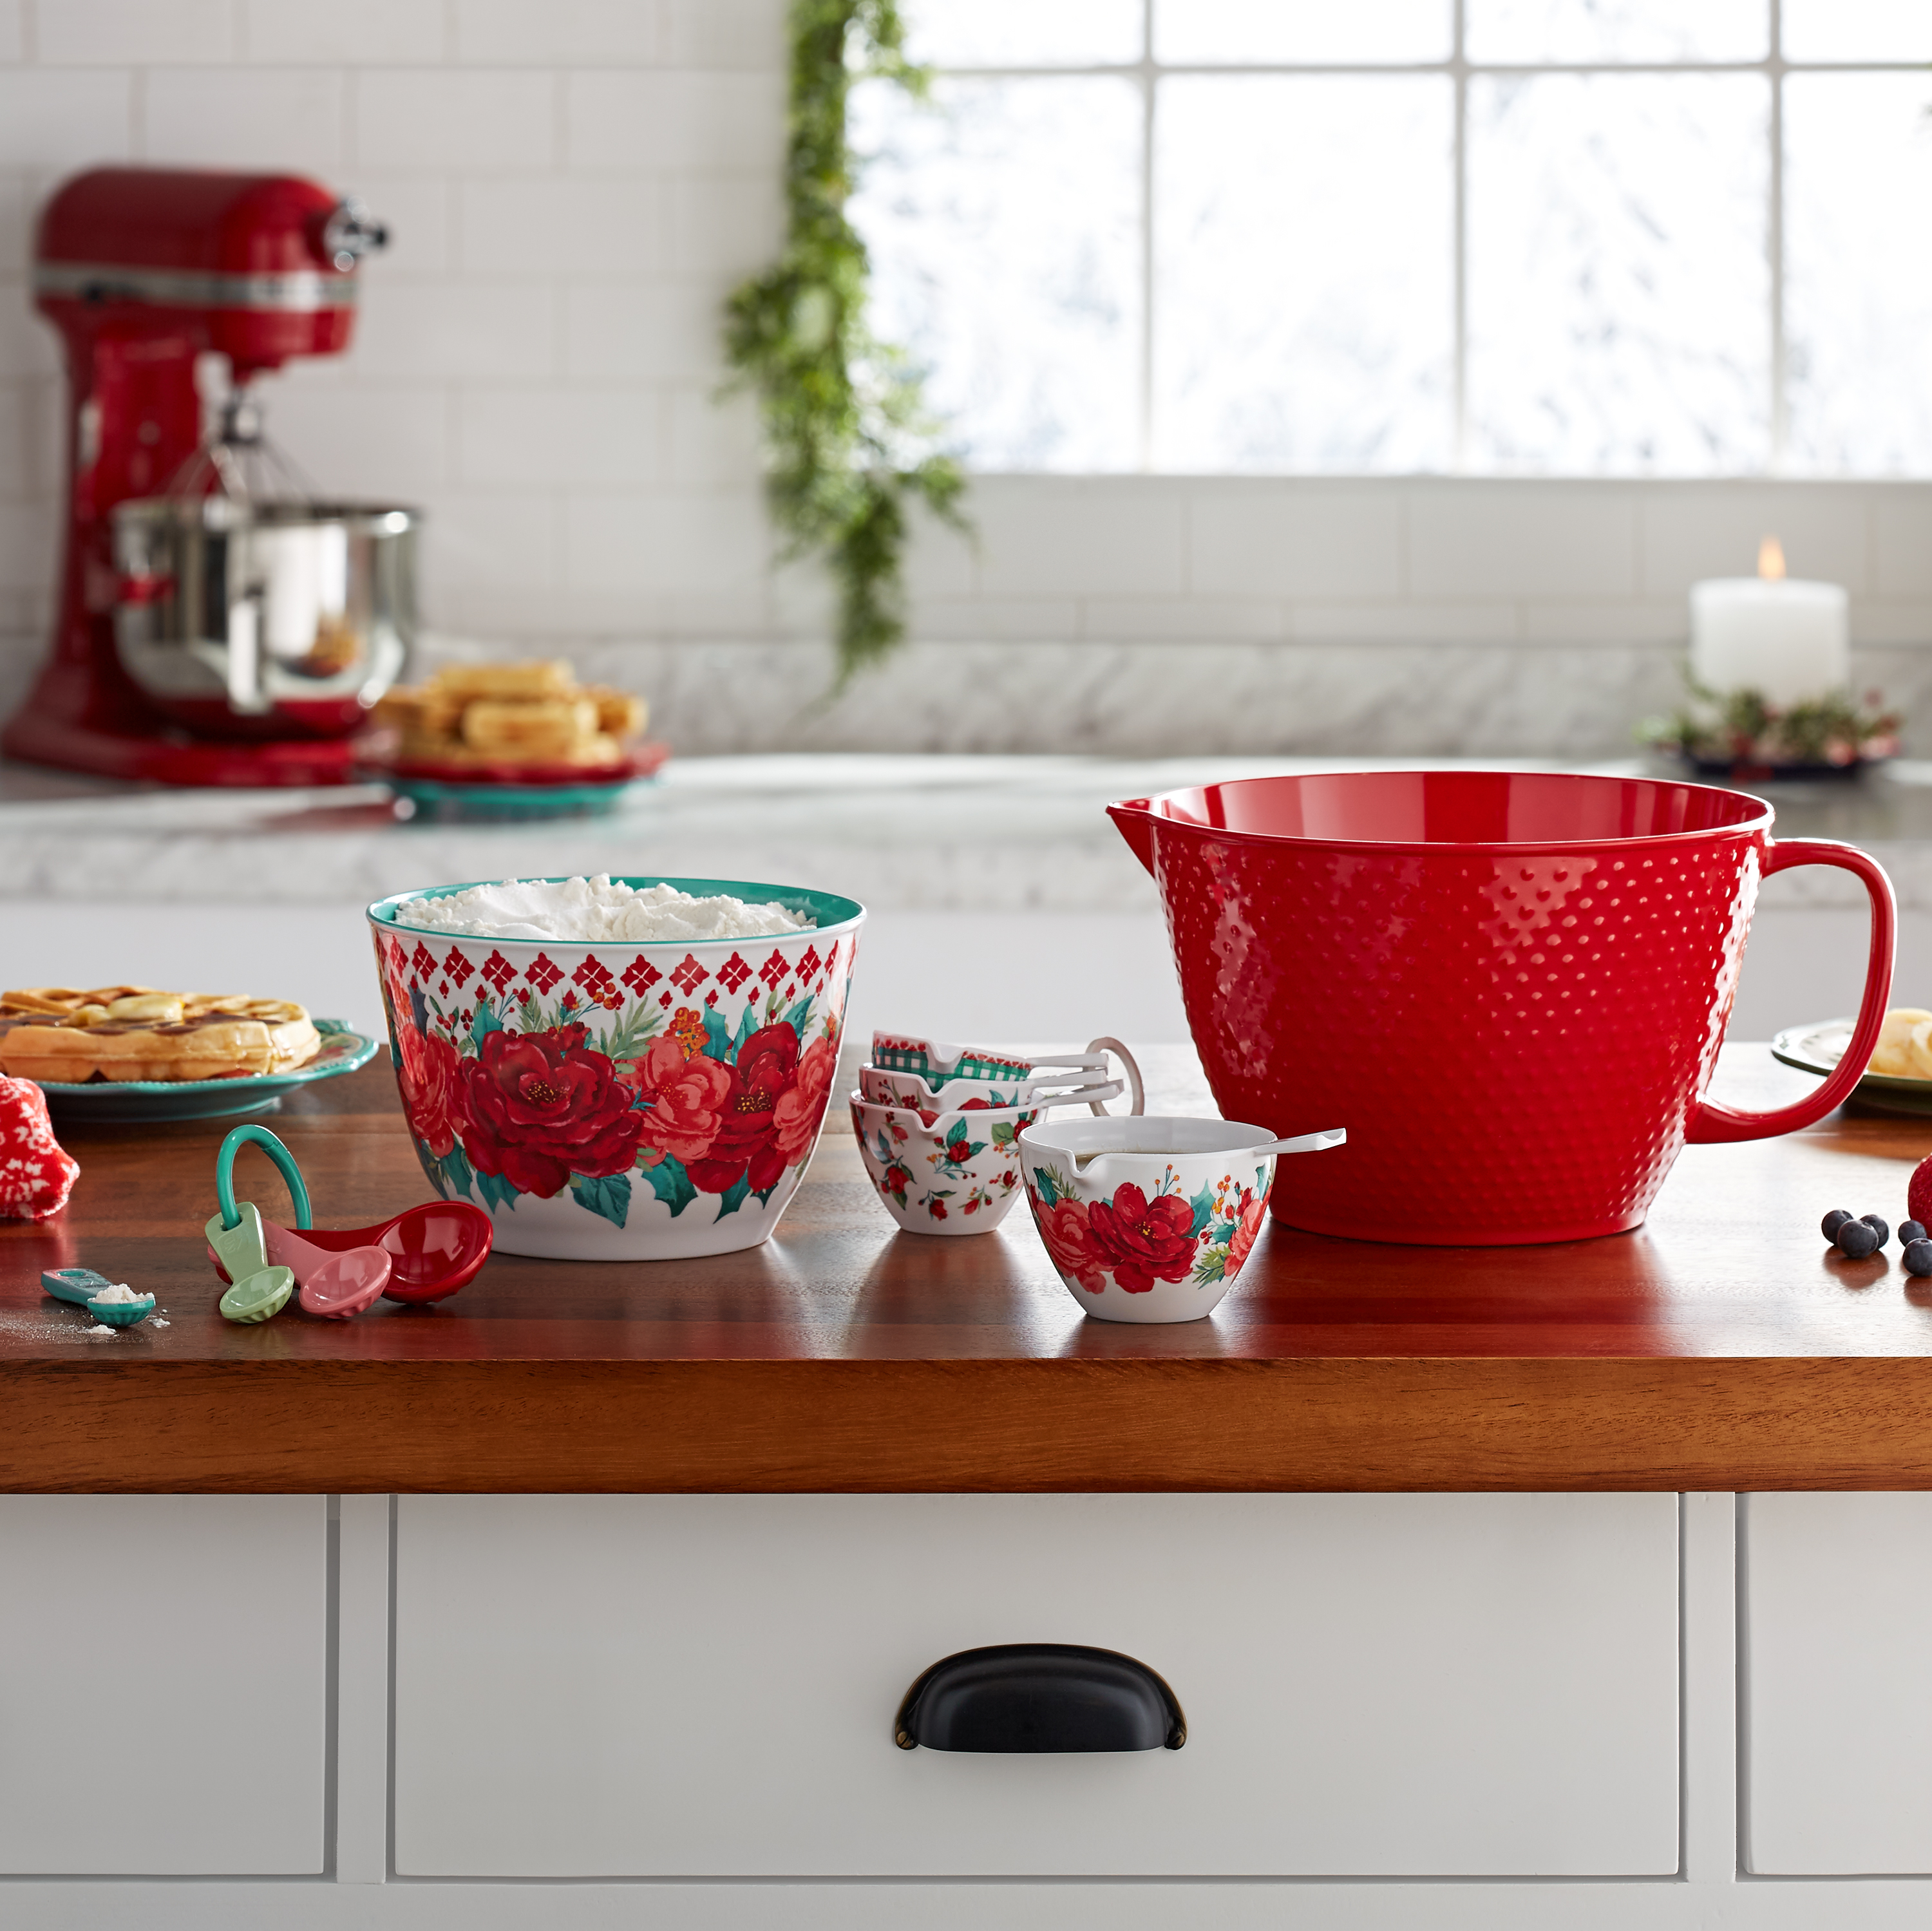 The Pioneer Woman 10-Piece Melamine Batter Bowl Set, Holiday Floral Red - image 1 of 16